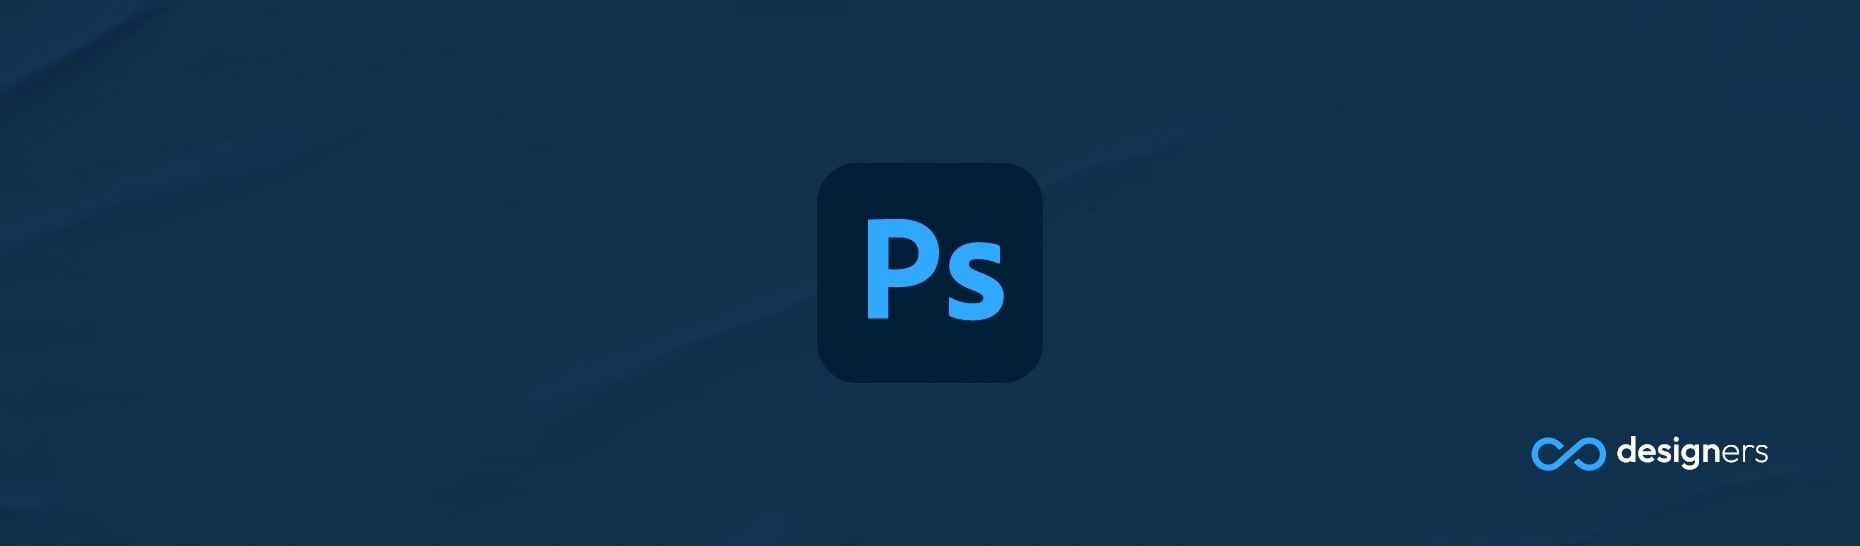 What is the standard size of a business card in Photoshop?